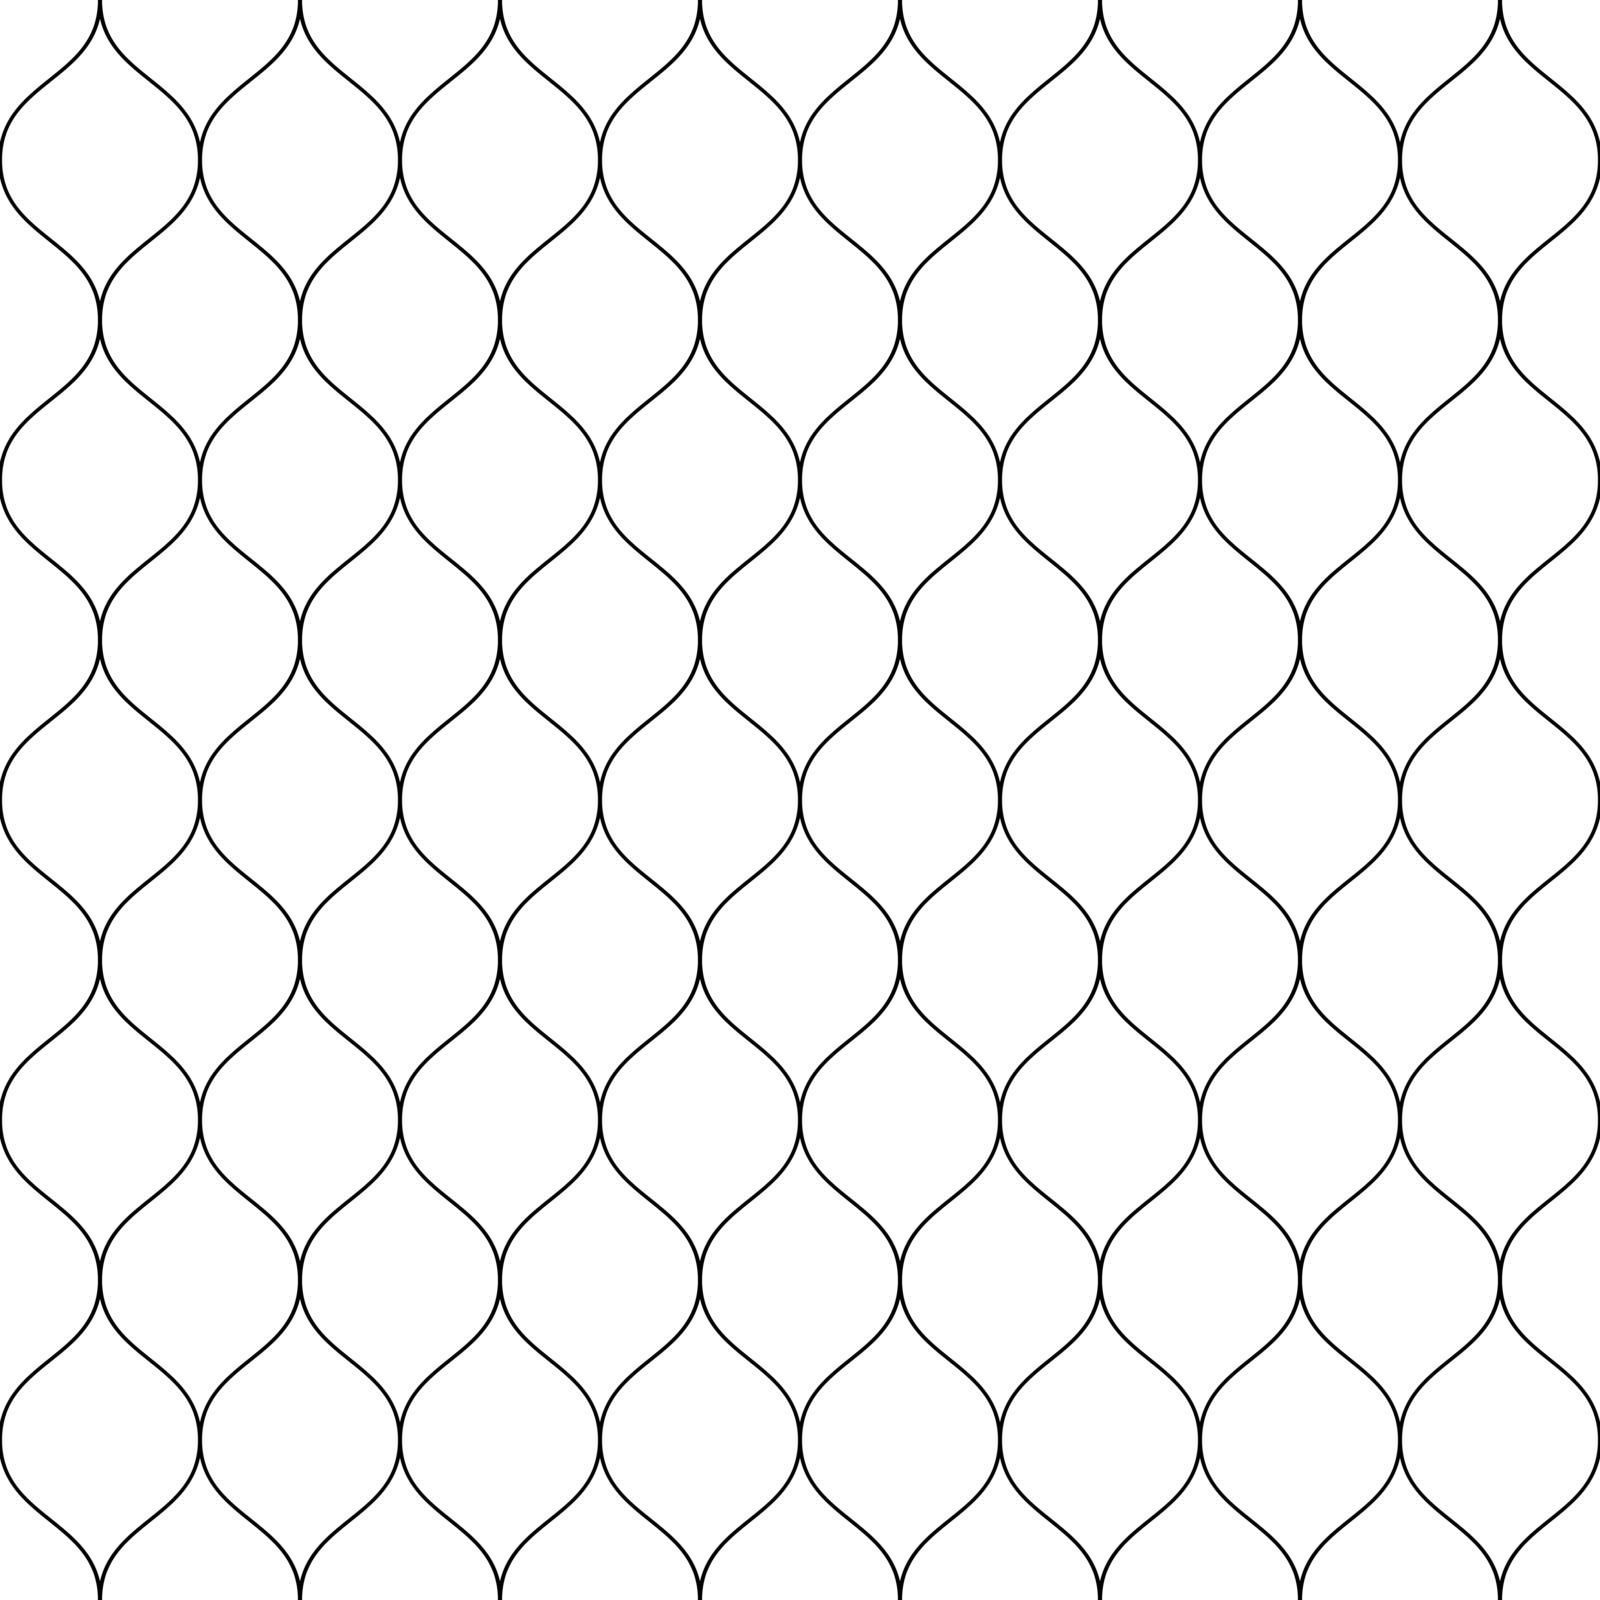 Seamless wired netting fence. Simple black vector illustration on white background by pyty